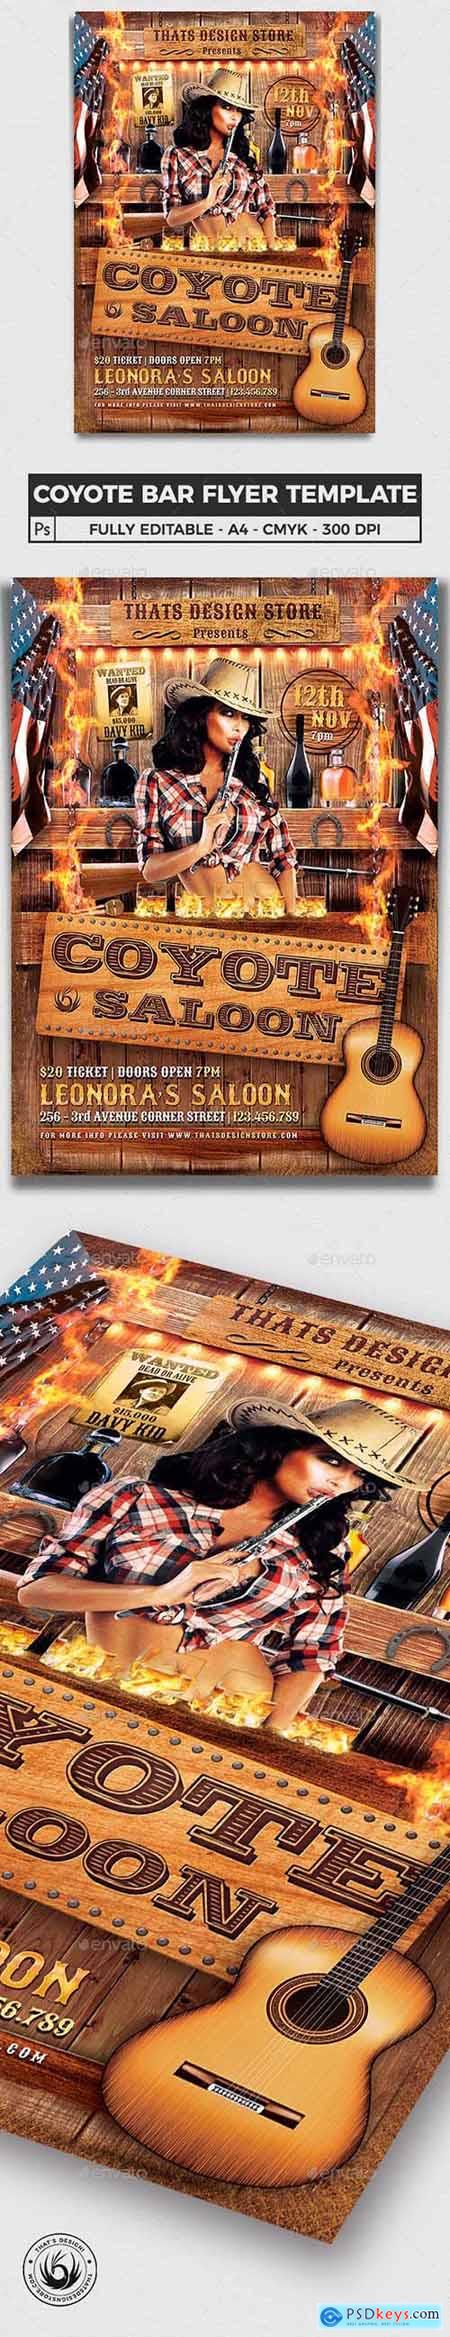 Graphicriver Coyote Bar Flyer Template